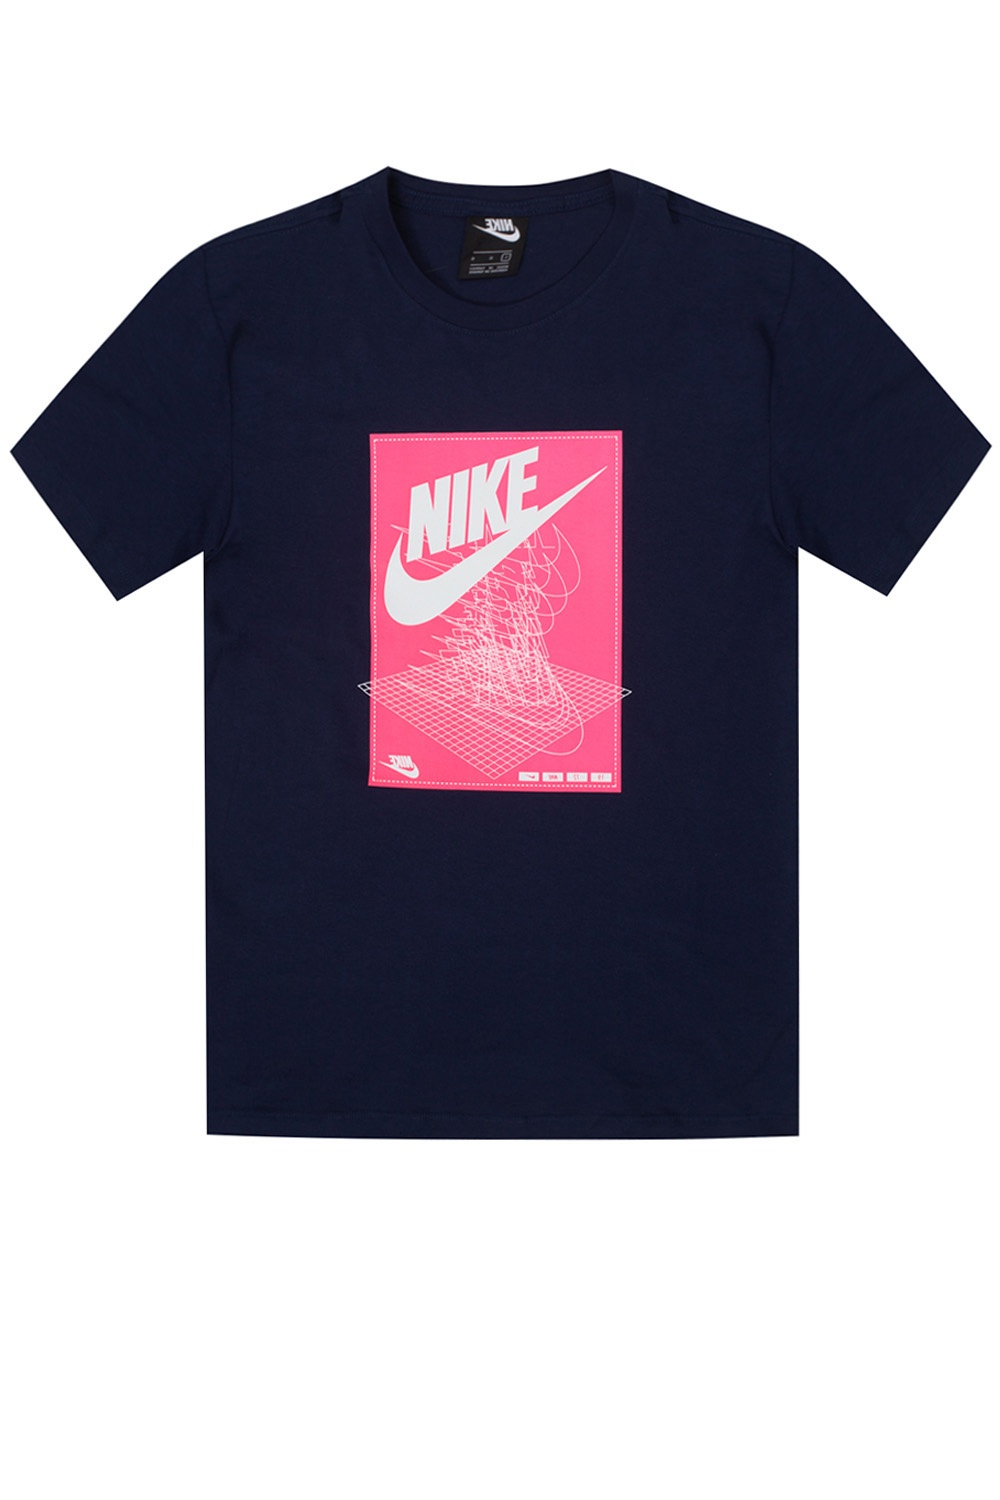 nike blue and pink shirt